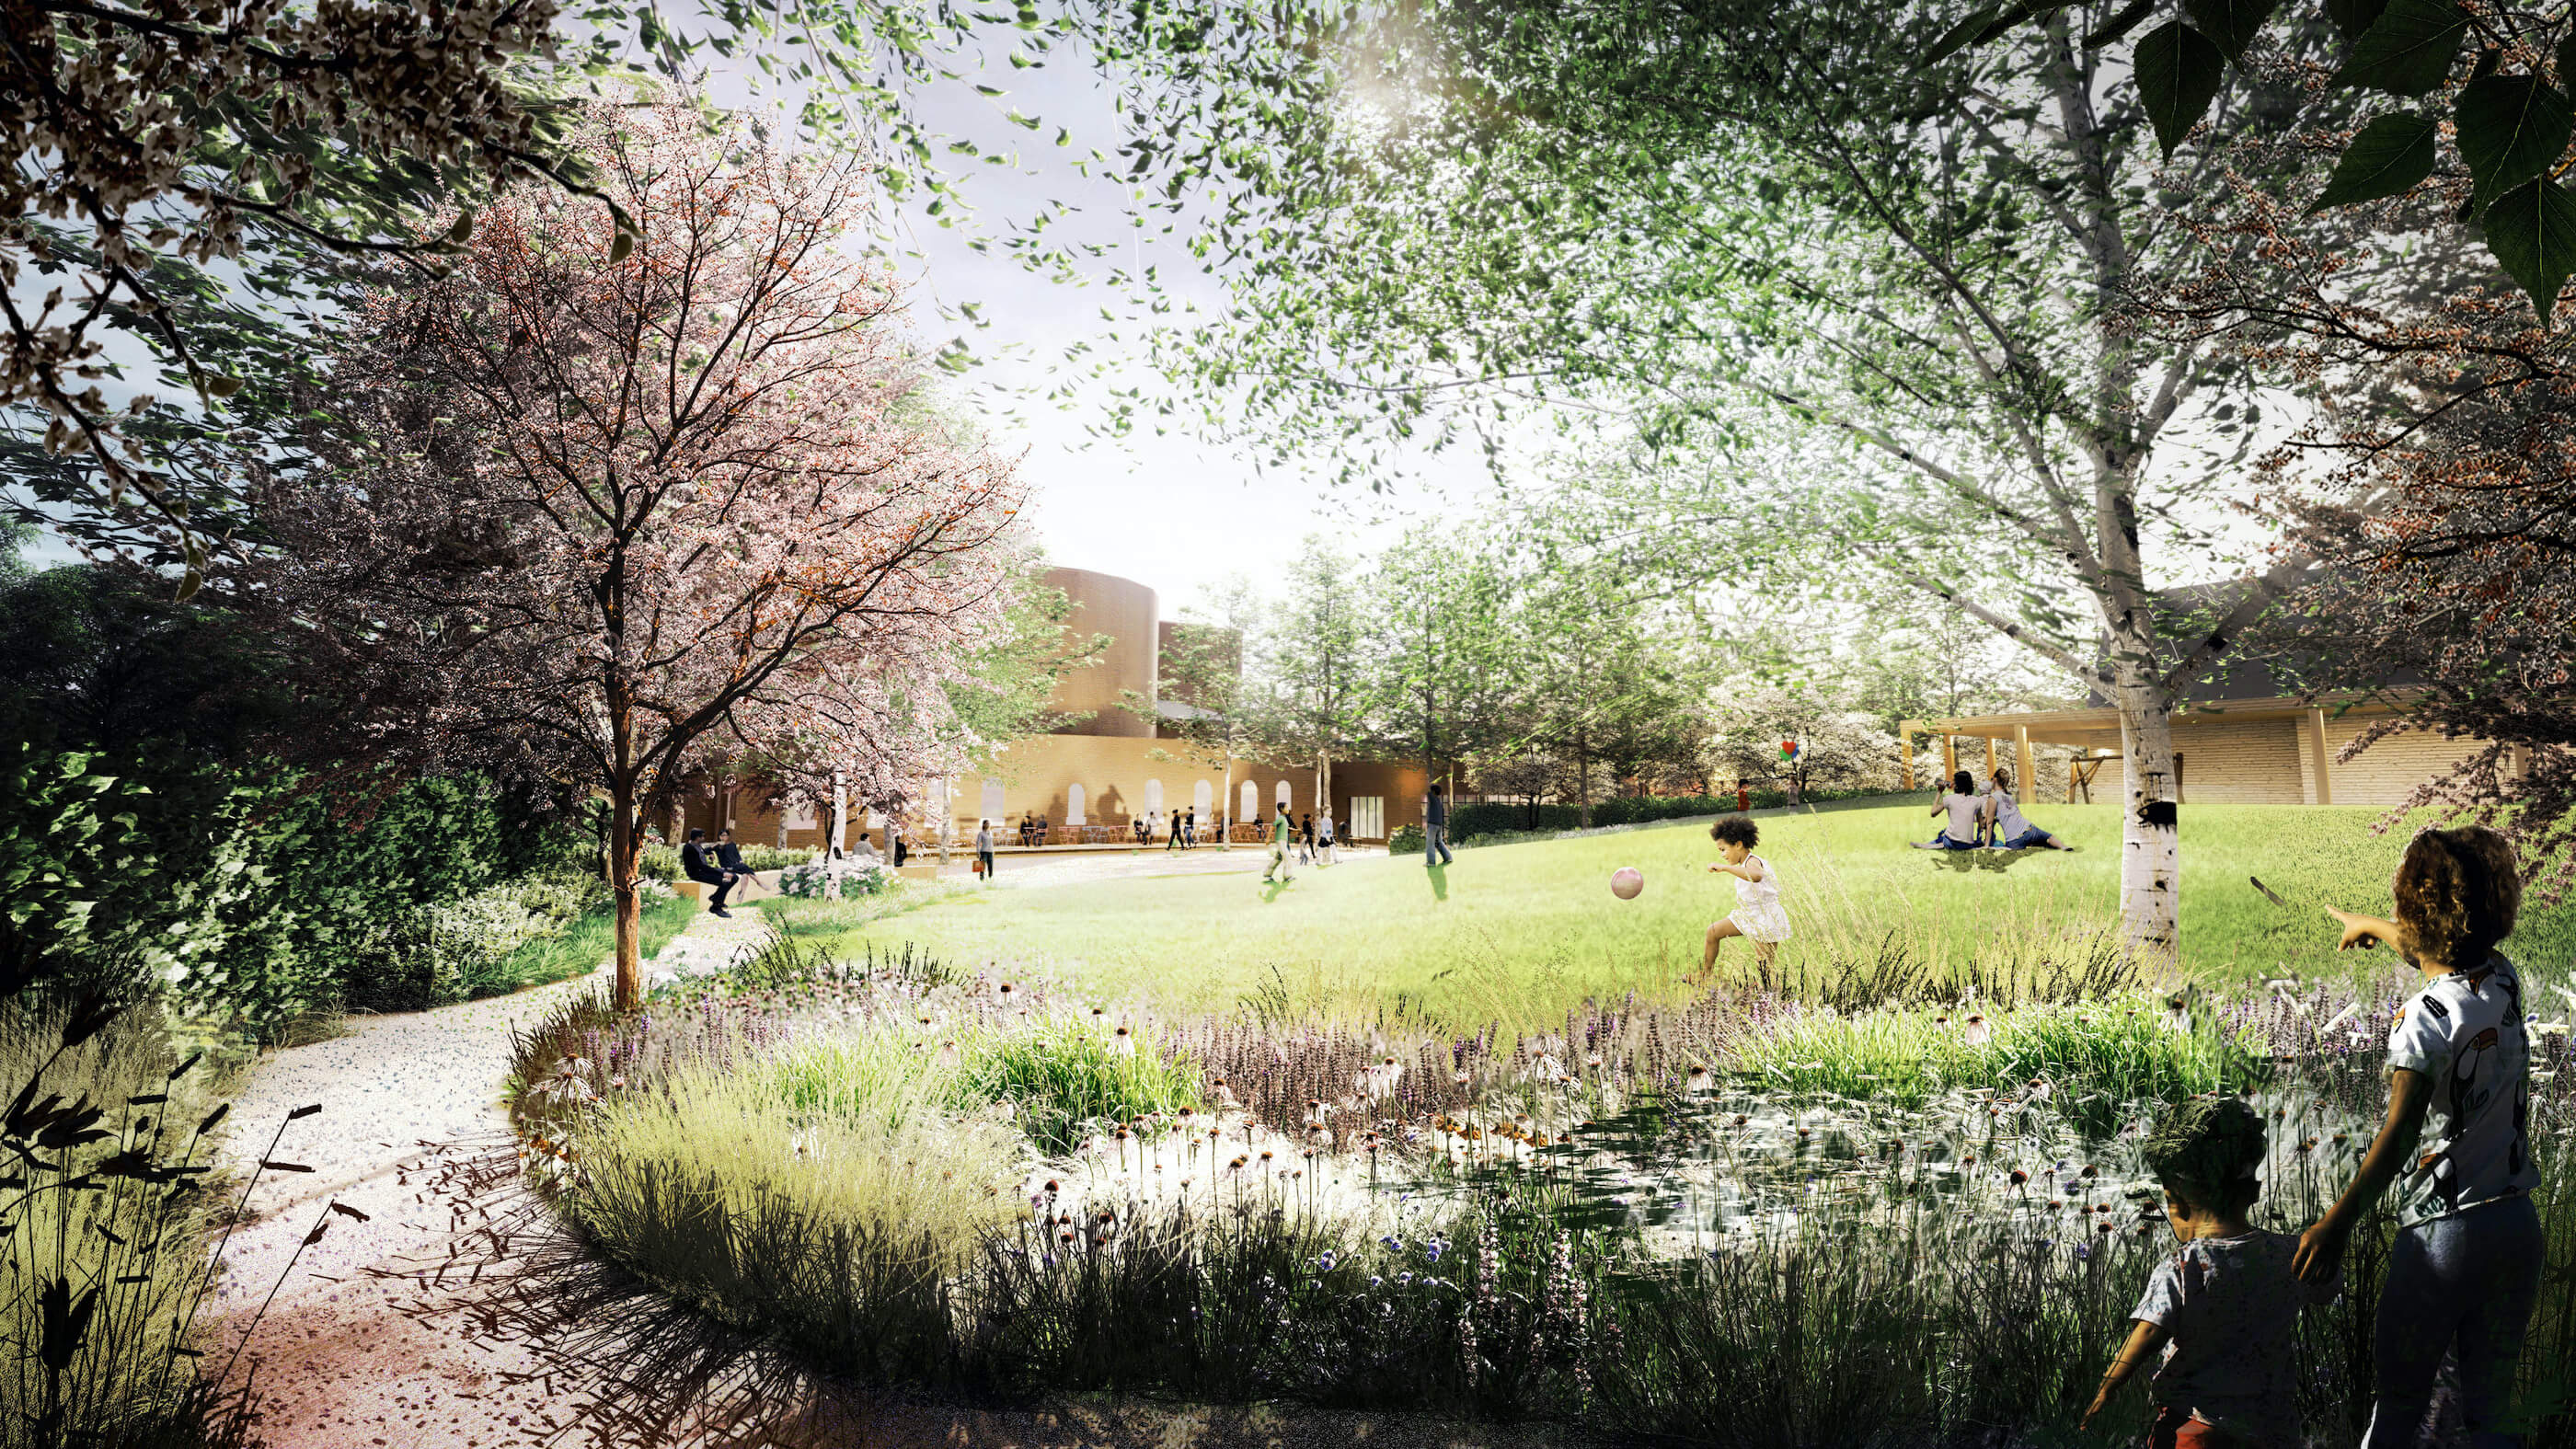 rendering of a lawn in a park for library street collective